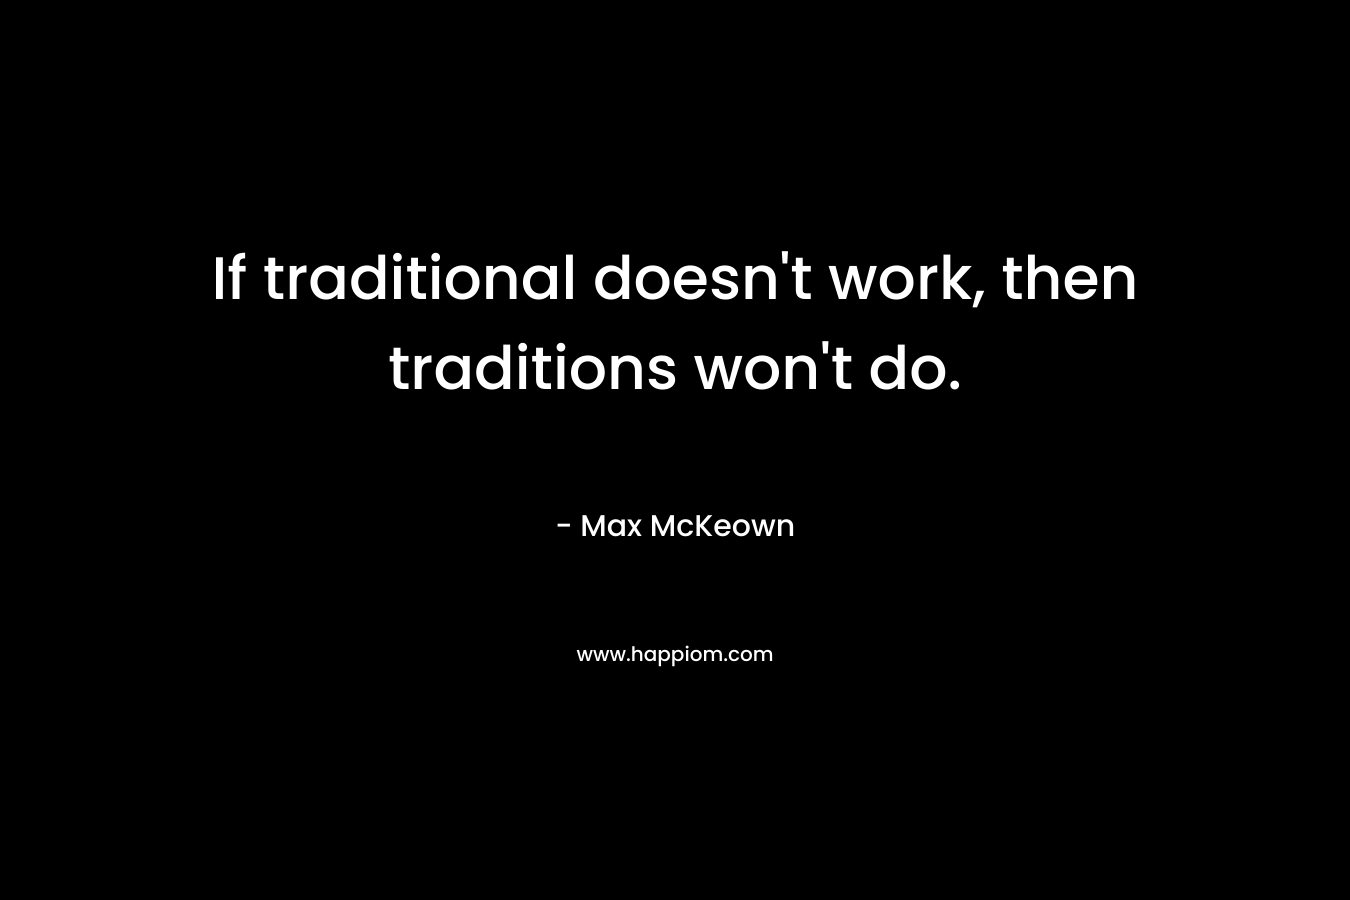 If traditional doesn't work, then traditions won't do.